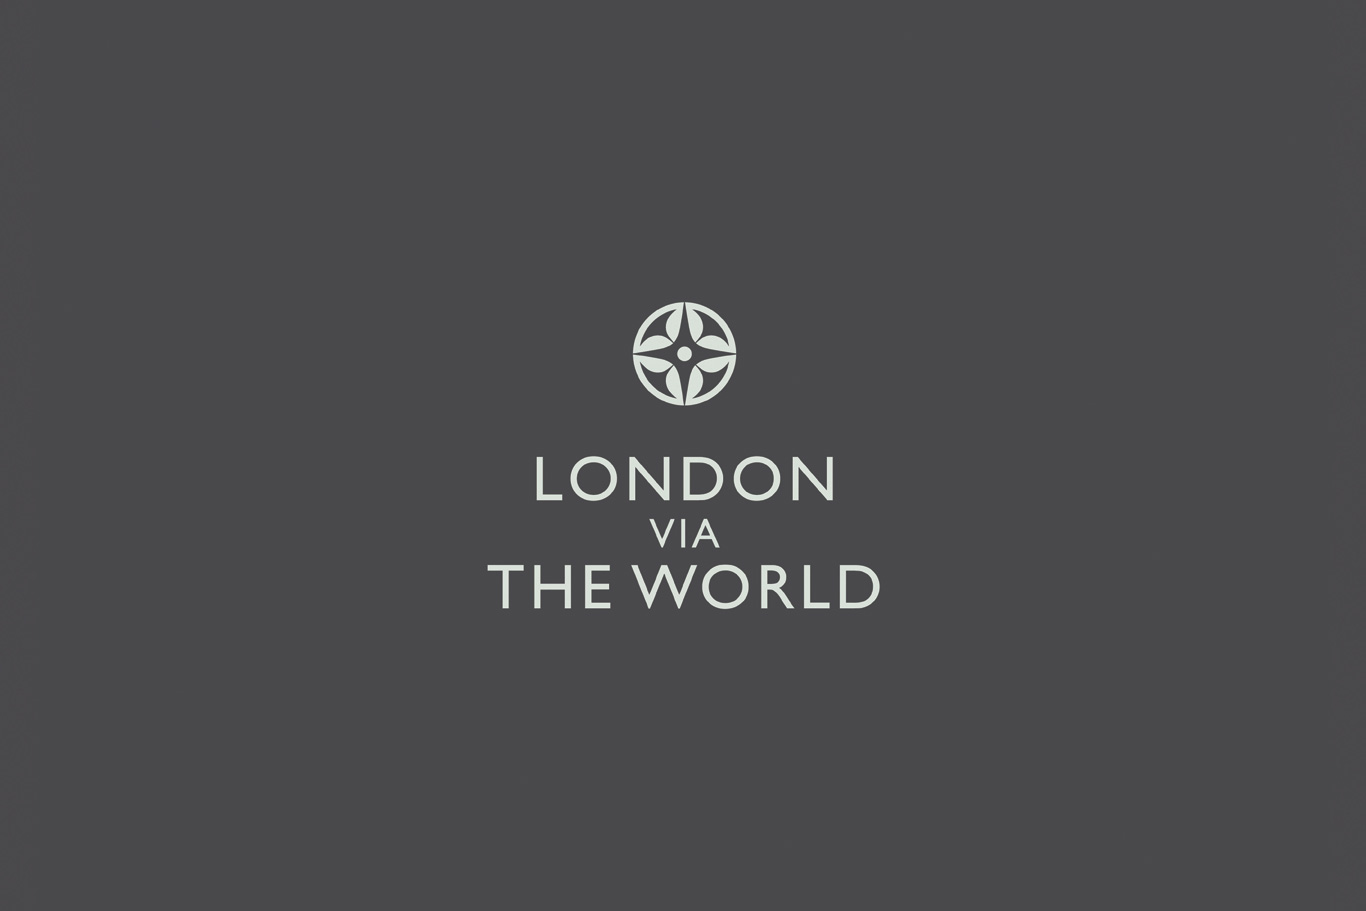 London via the world - Molton Brown’s brand, summed up in four words.